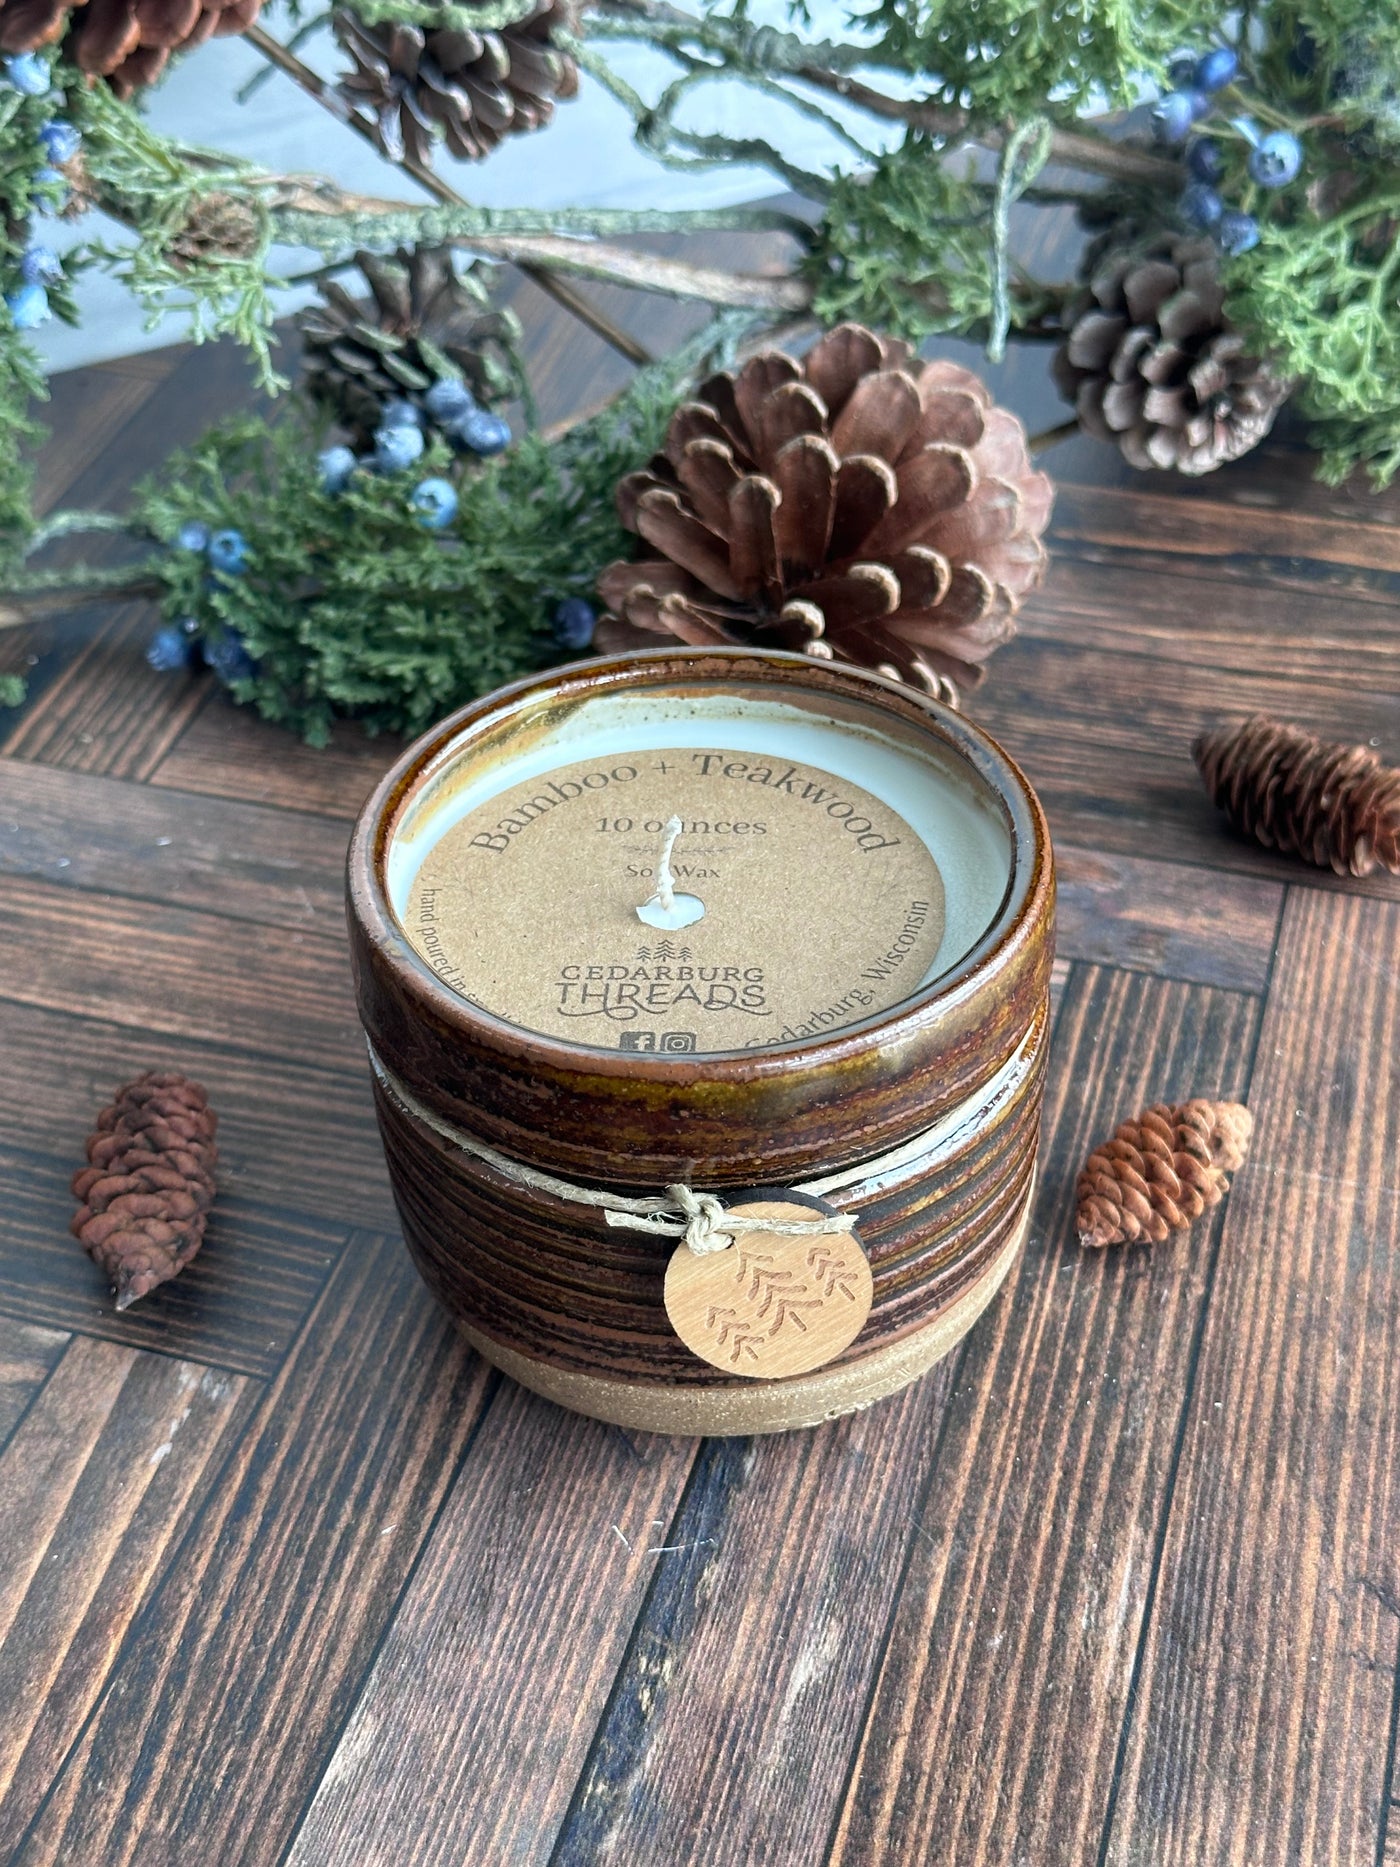 10 oz Bamboo & Teakwood soy candle in brown ceramic vessel